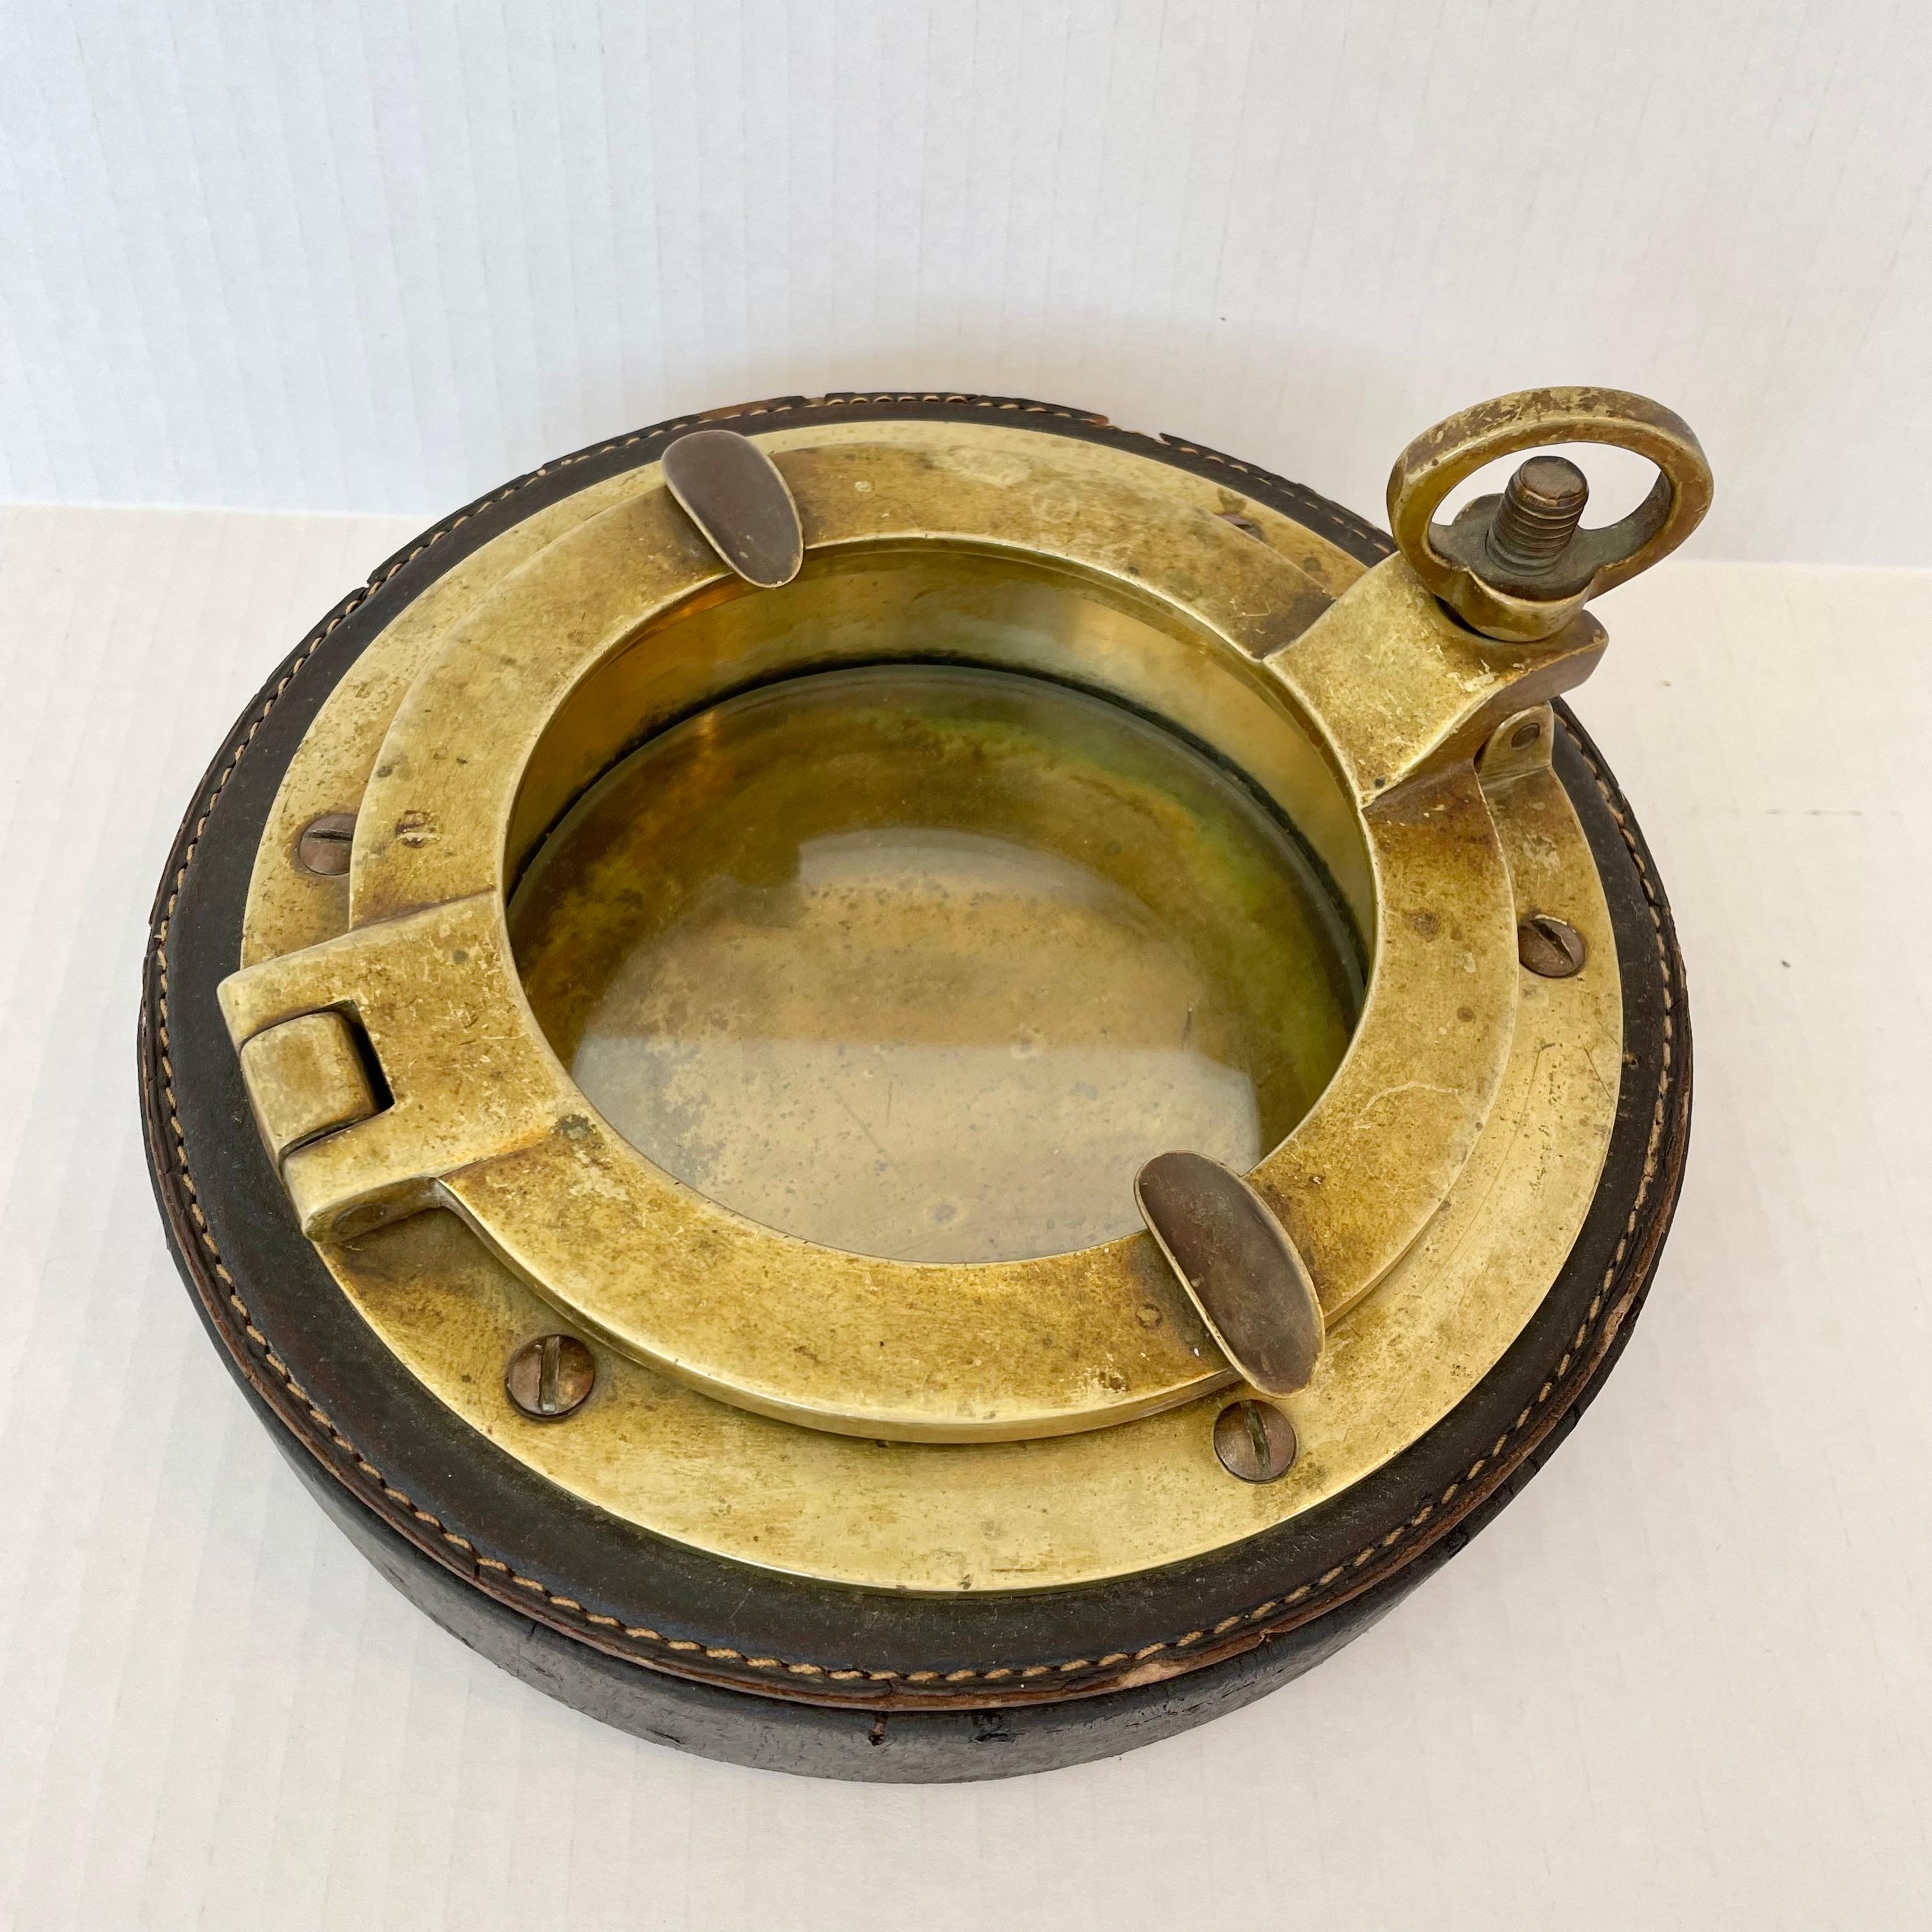 Impressive leather and brass ashtray by Gucci. Nautical theme with a working brass porthole that opens and closes to dump ashes. Leather frame. Heavy and substantial. Gucci stamp underneath. Large scale. Great piece of collectible Gucci design.